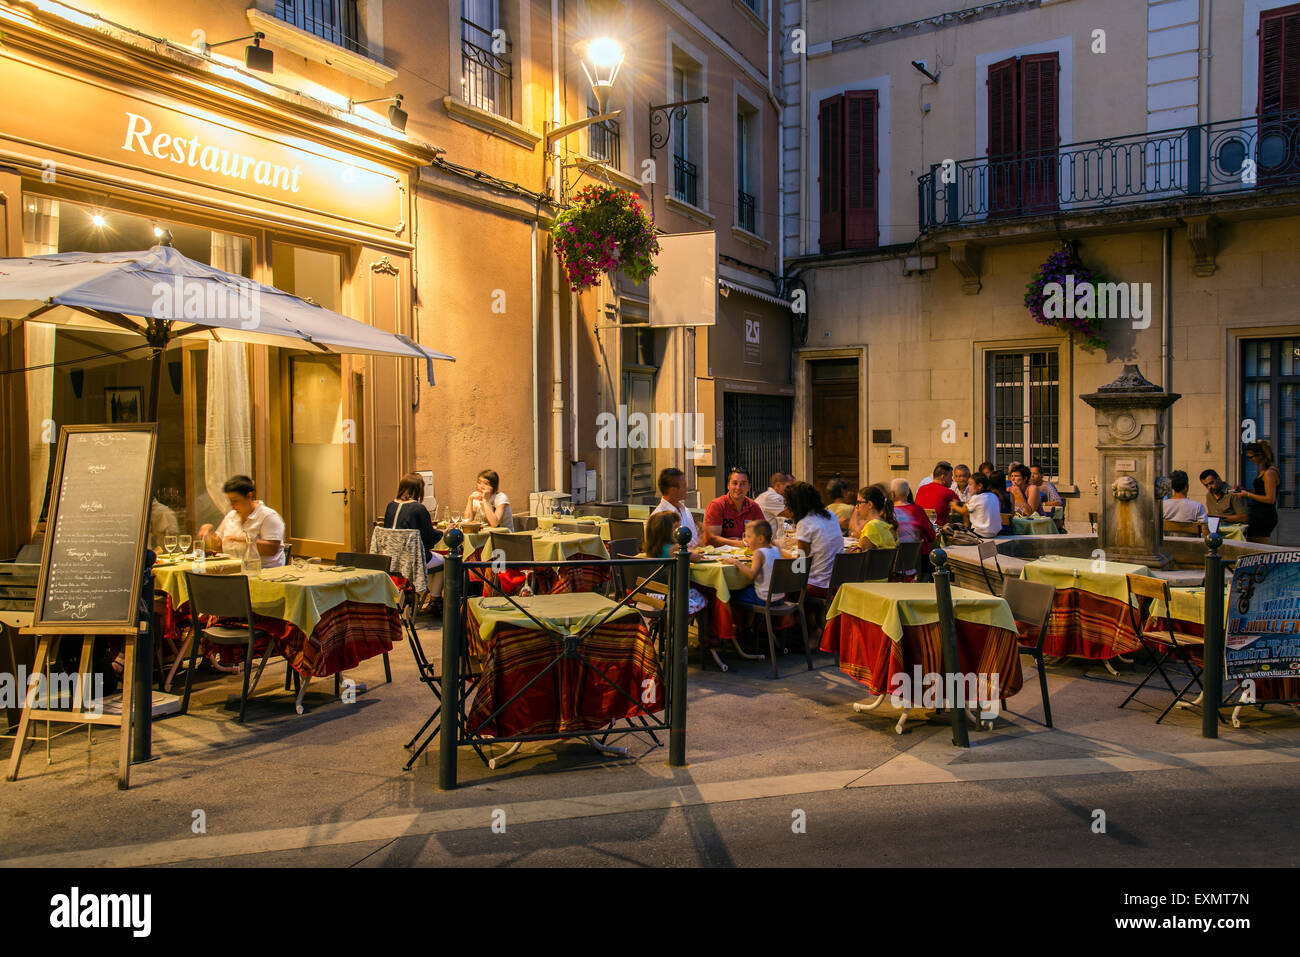 Night view of a restaurant with people seated outside at tables, Carpentras, Provence, France Stock Photo